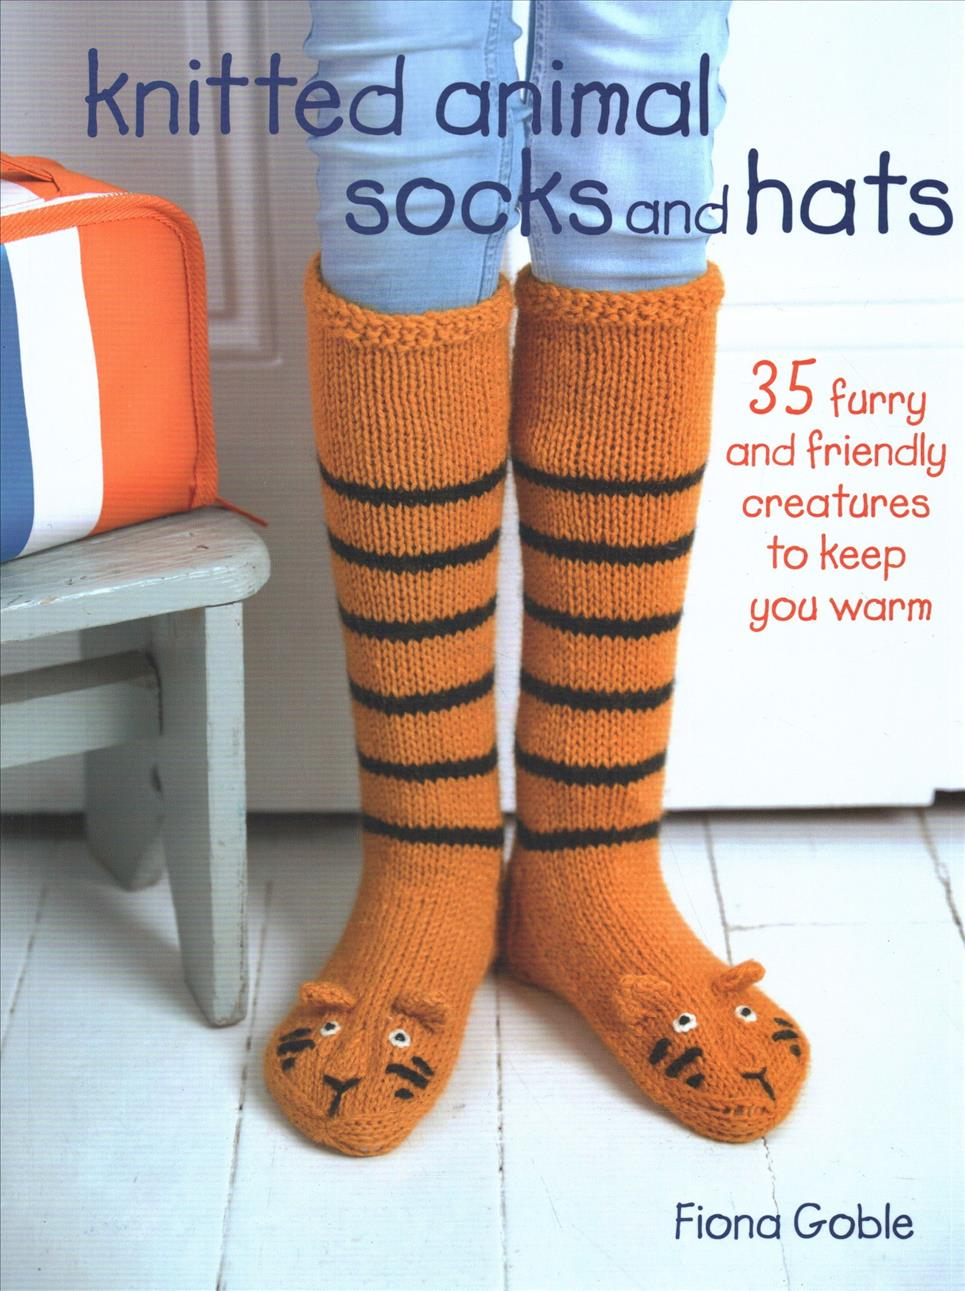 Animal Knitting Patterns Knitted Animal Socks And Hats Fiona Goble Paperback